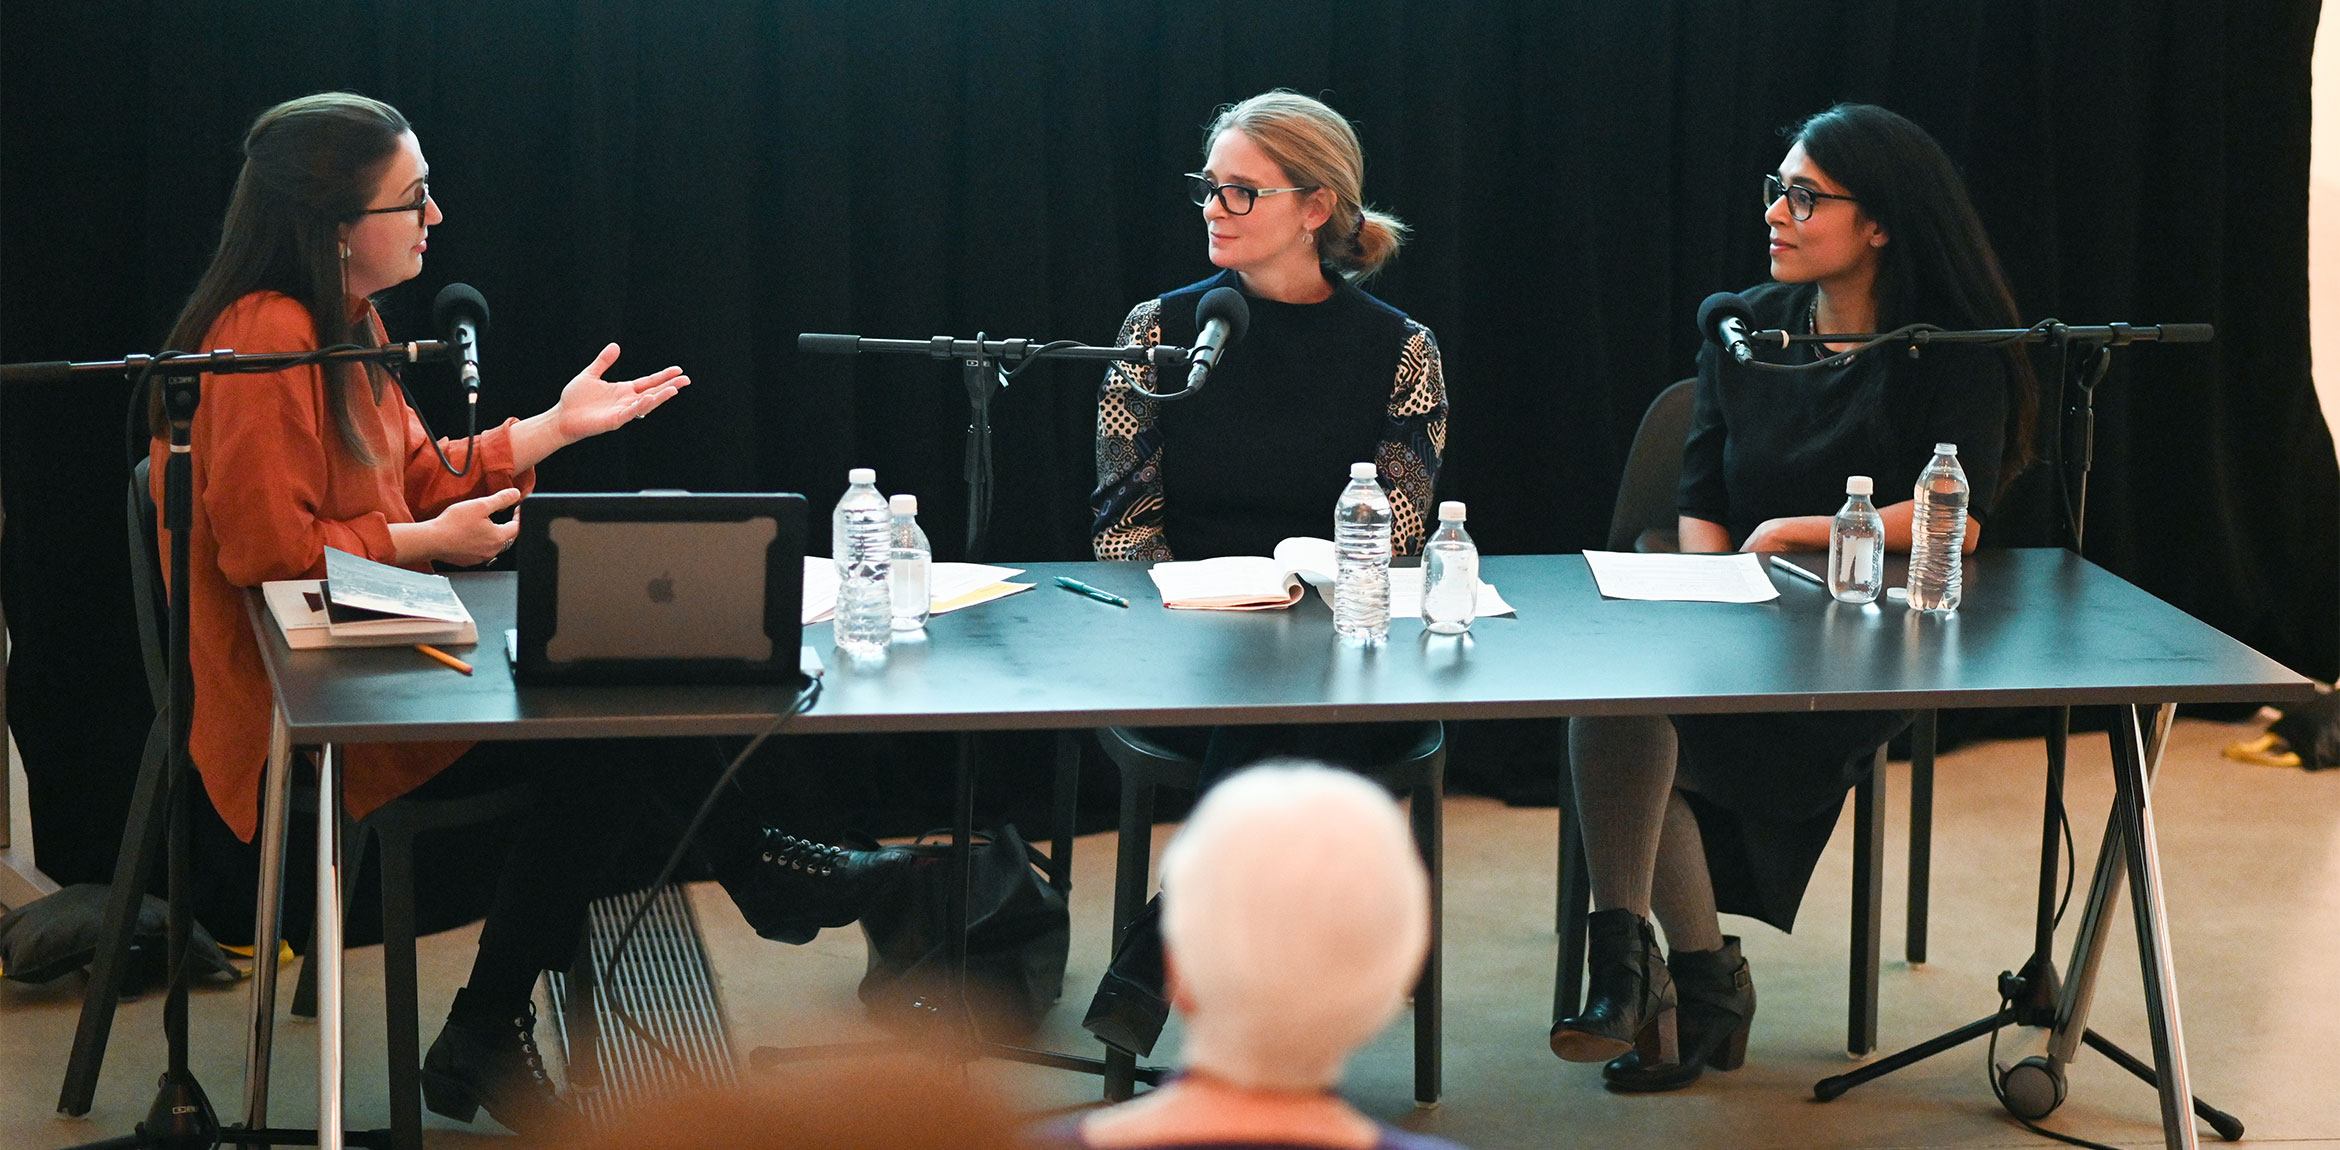 Tamara H. Schenkenberg speaks to Allegra Pesenti and Sarah Burney at a table with microphones in the Lower Main Gallery.